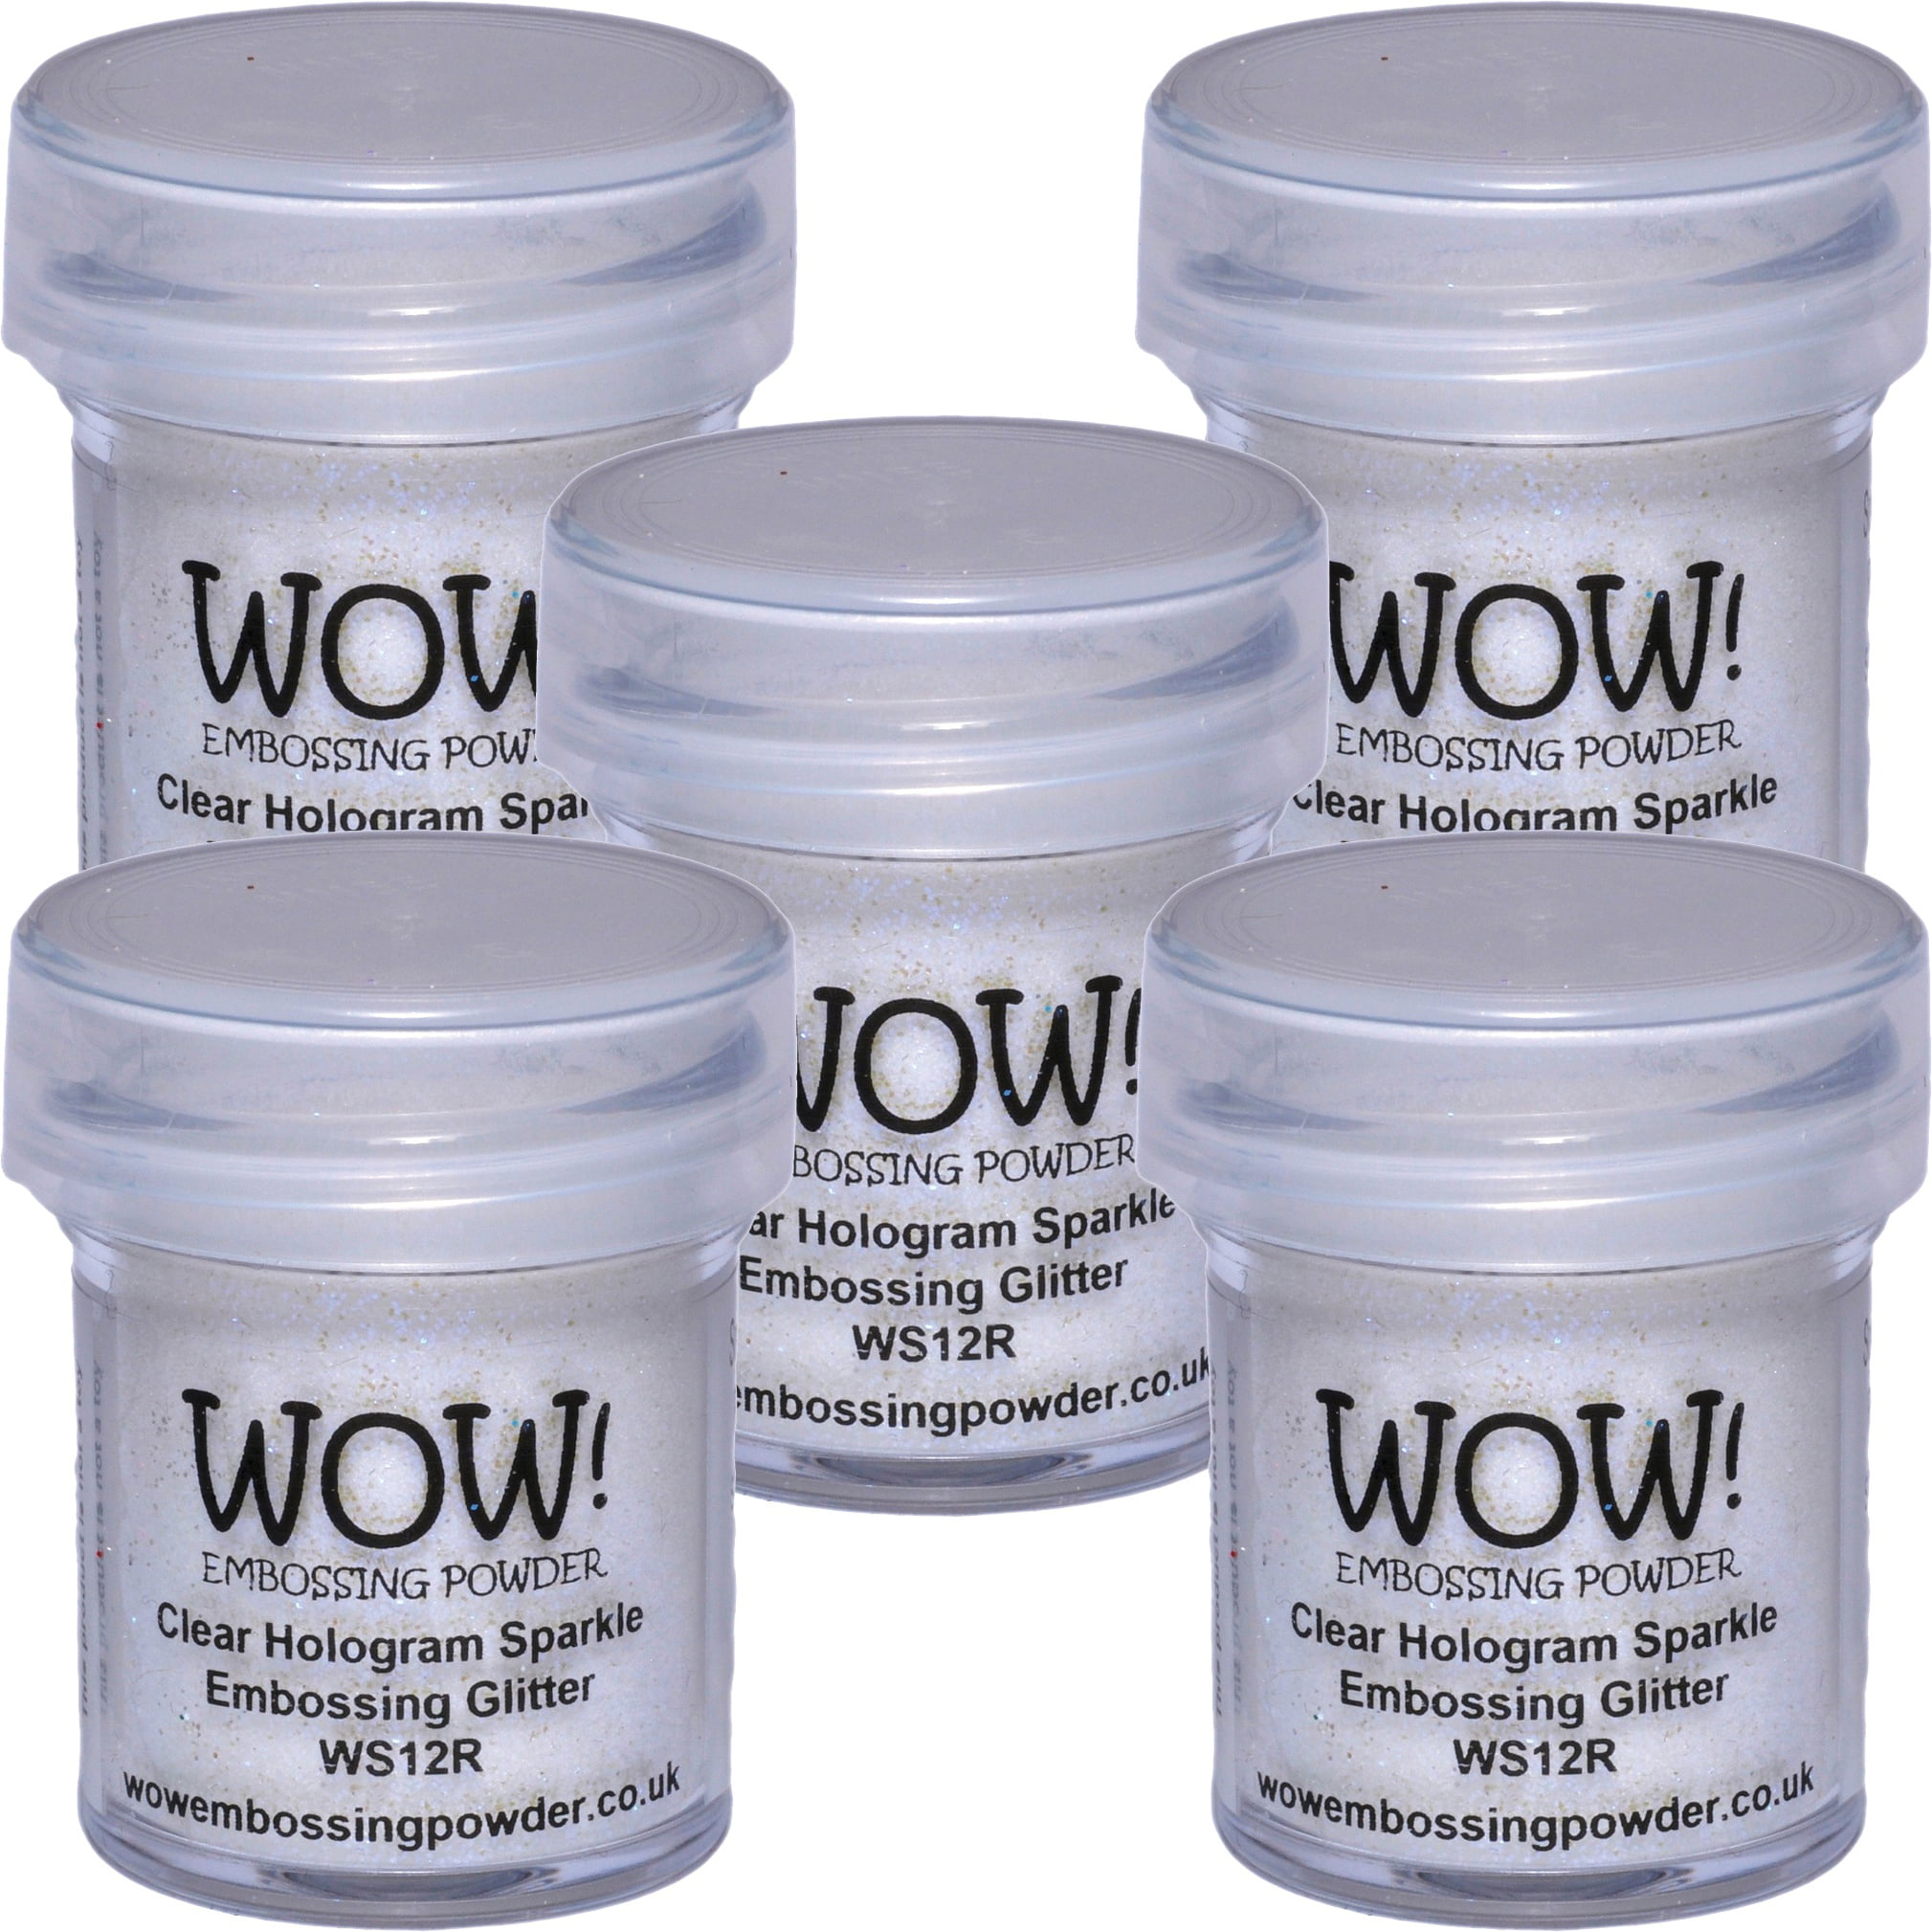 WOW! Embossing Powder 15ml-Clear Hologram Sparkle 